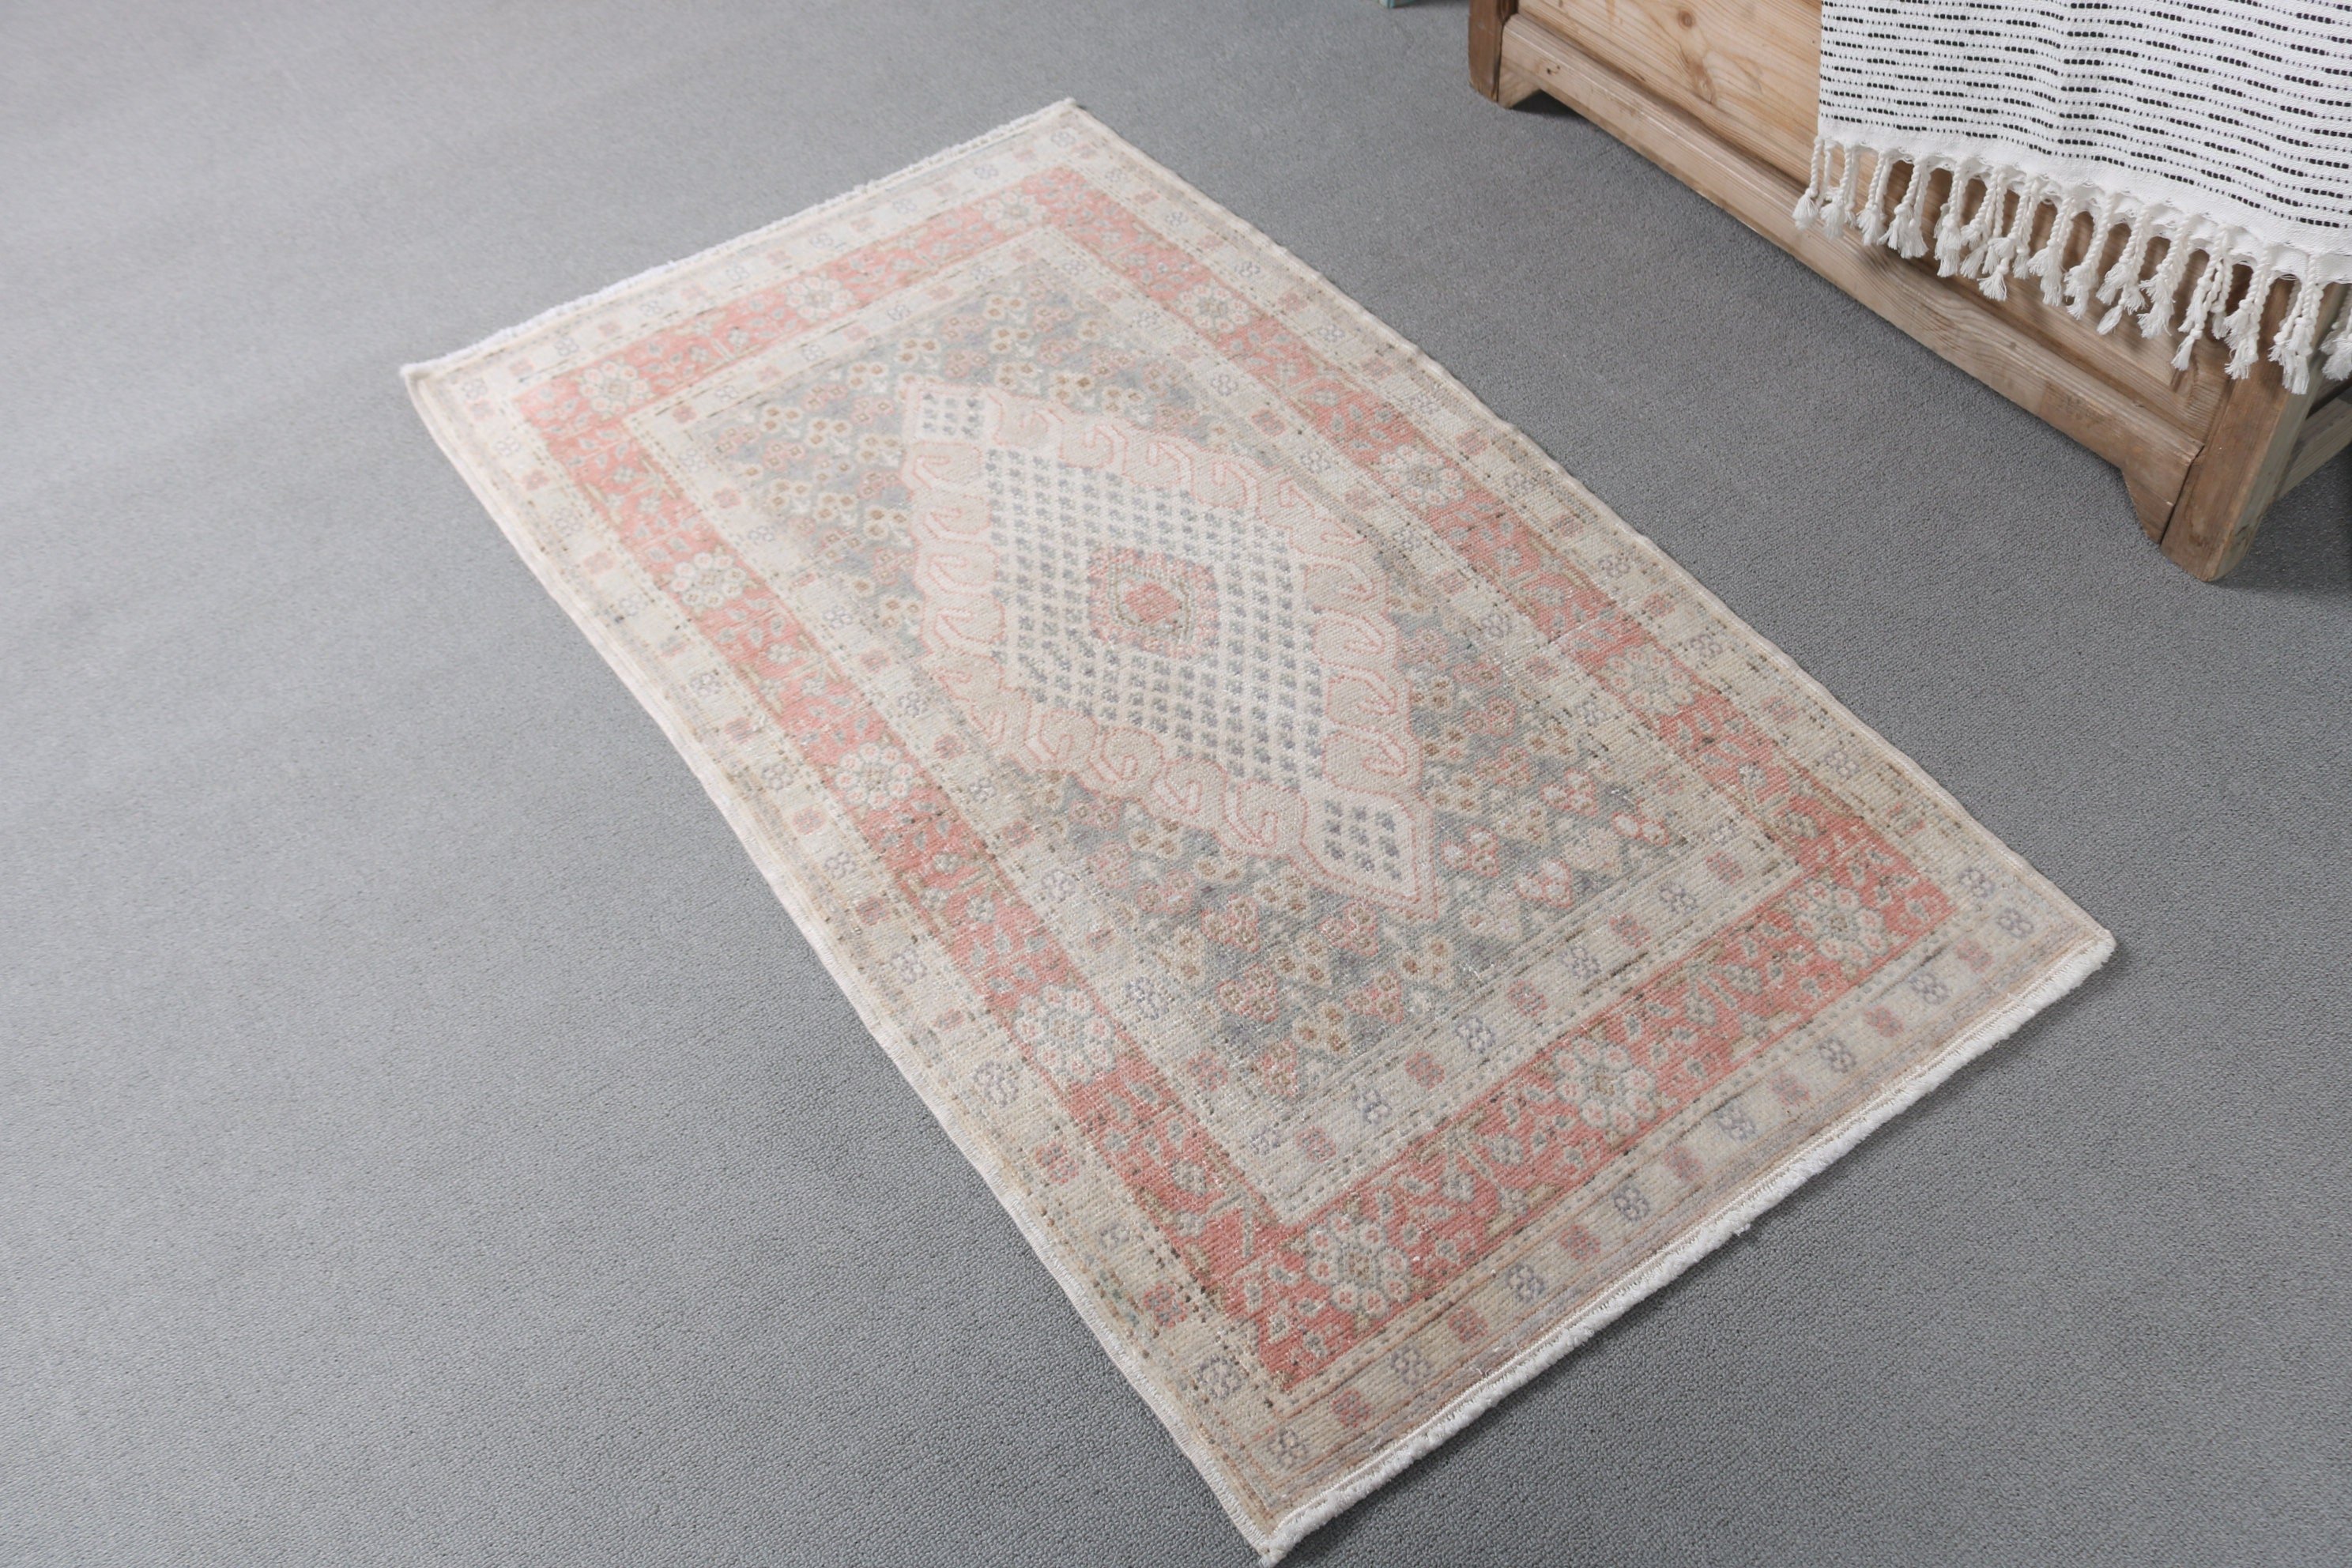 Anatolian Rug, Rugs for Entry, Moroccan Rug, Turkish Rugs, 2.1x3.7 ft Small Rug, Entry Rug, White Moroccan Rugs, Bedroom Rugs, Vintage Rug